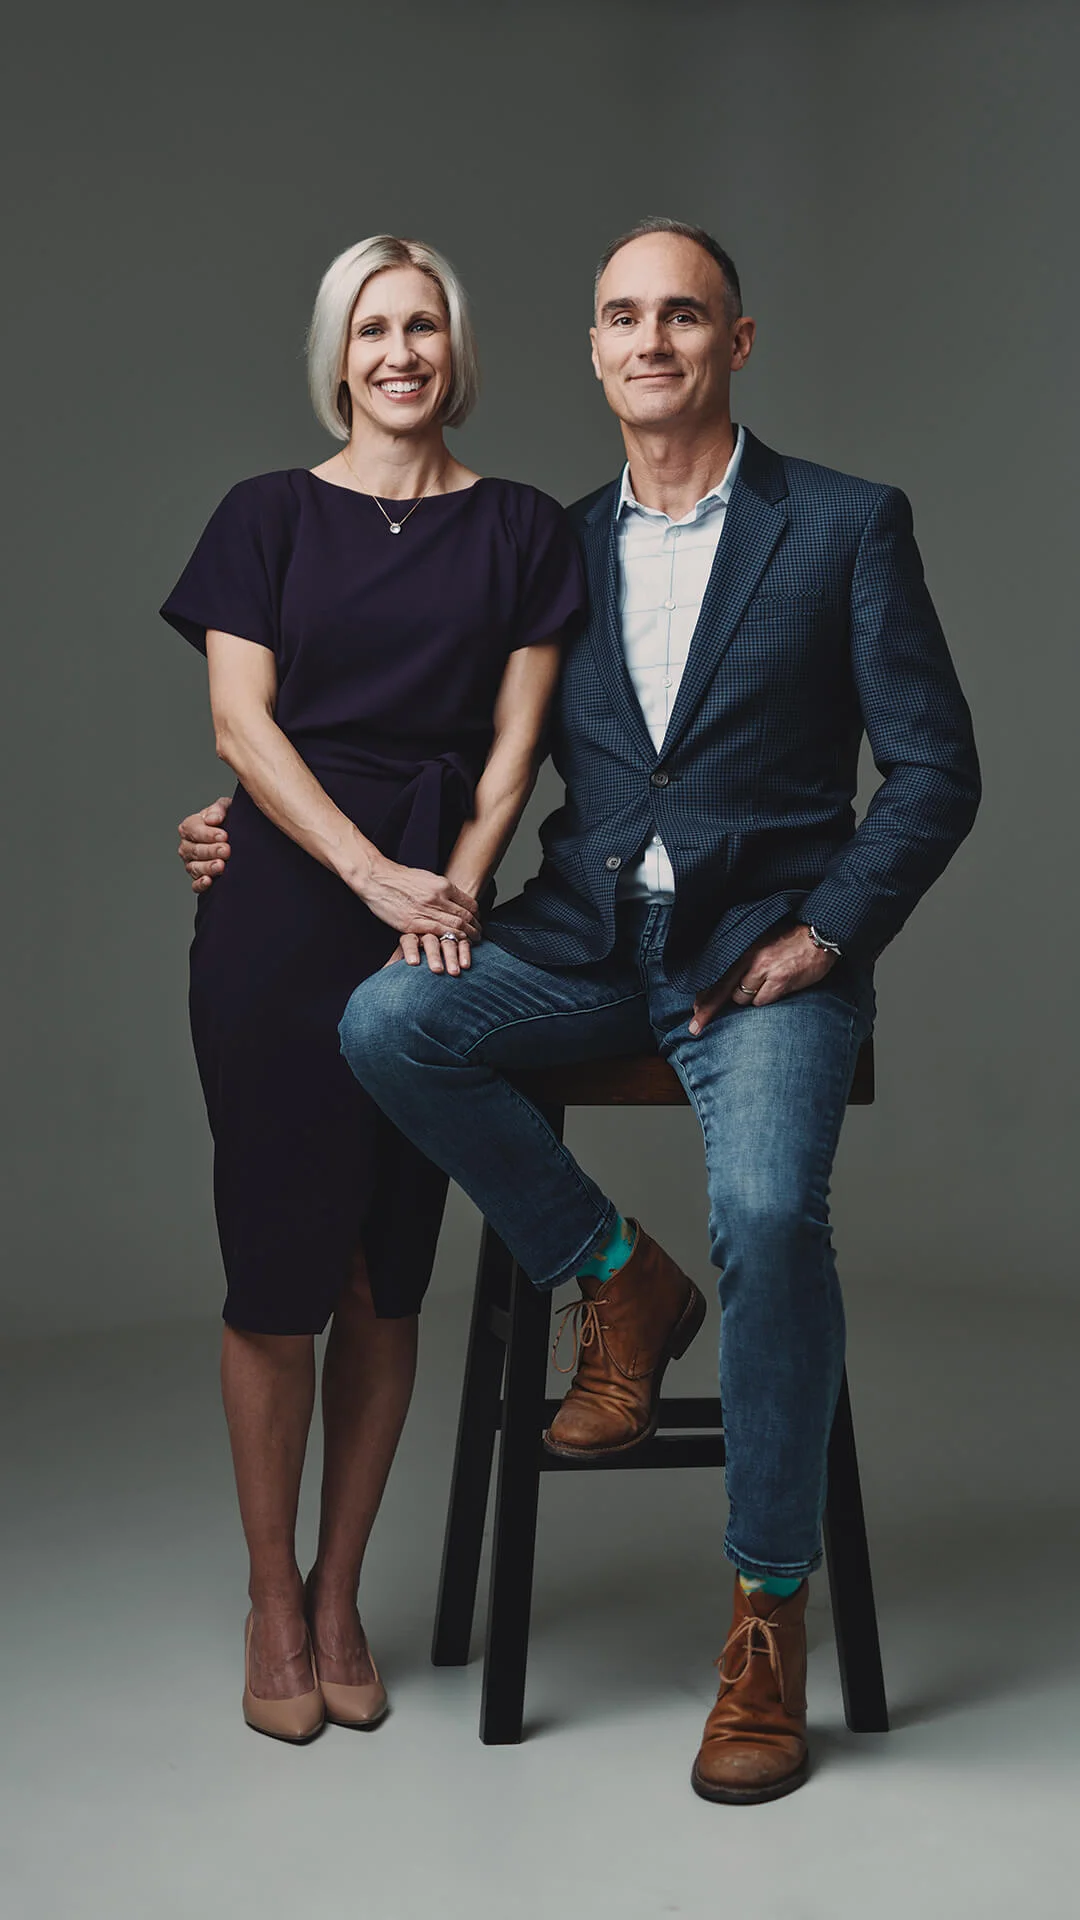 A professionally dressed, cheerful duo poses together against a gray backdrop.